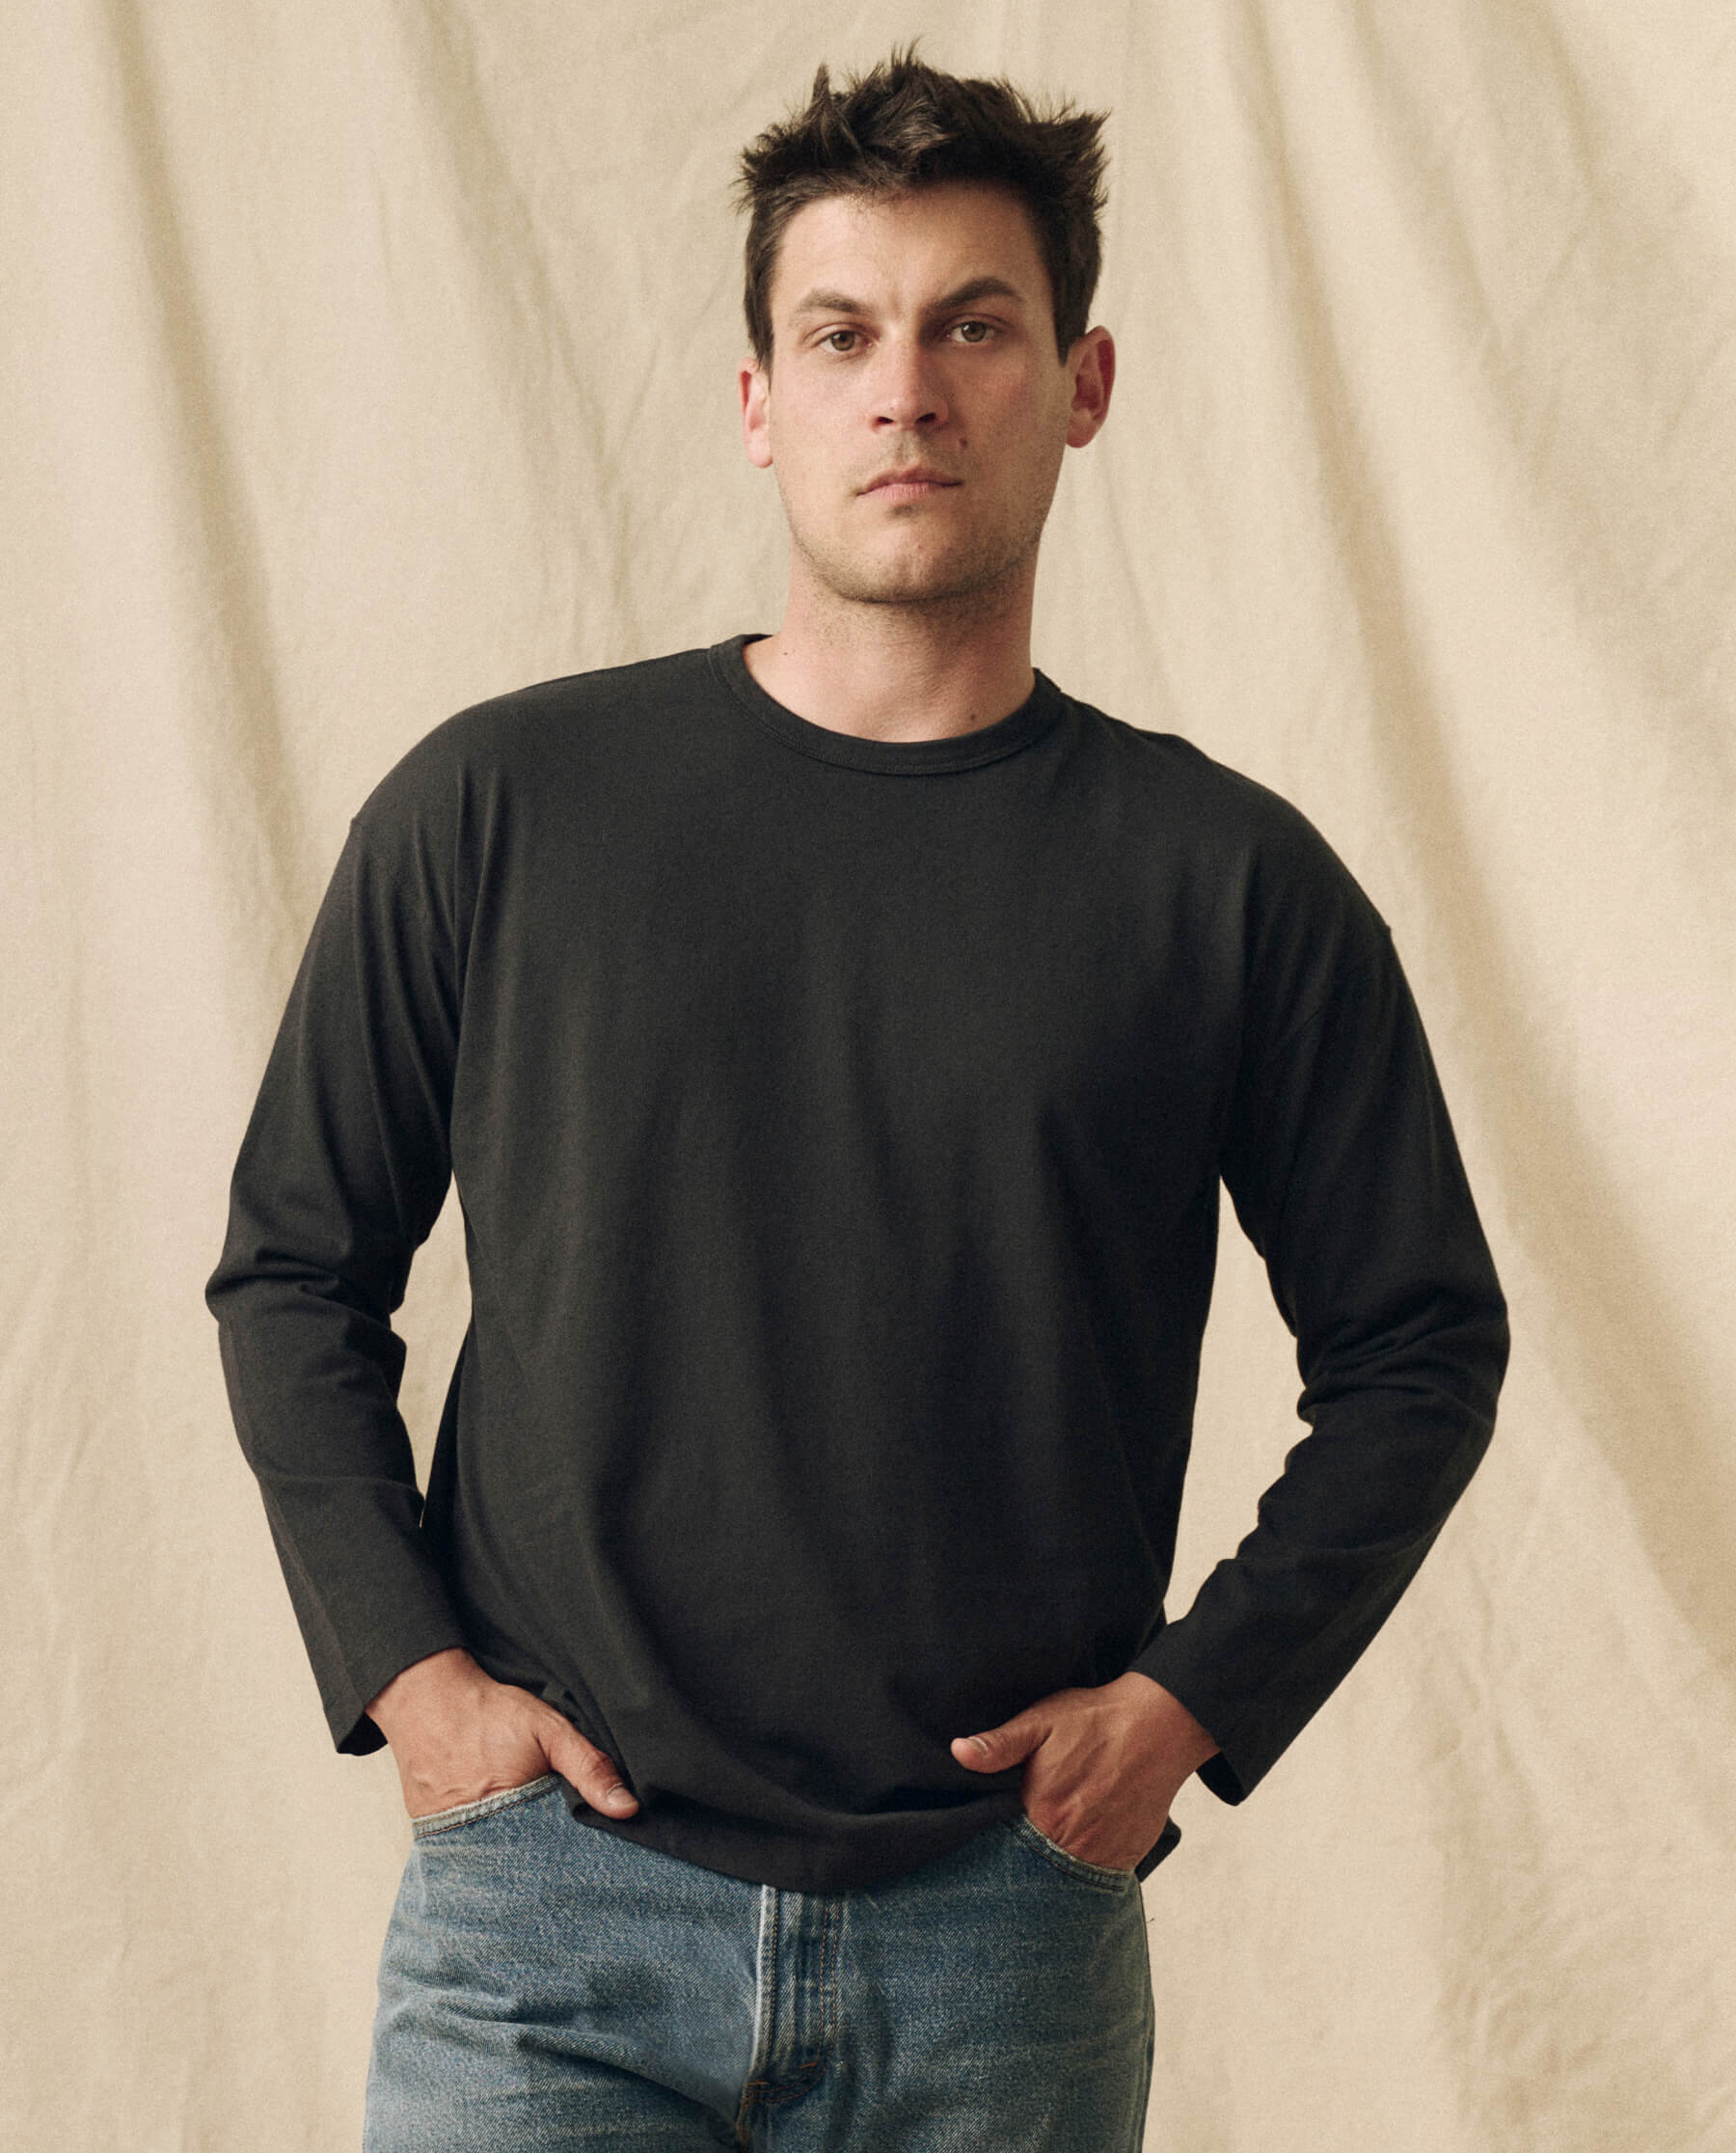 The Men's Pure Knits Long Sleeve Boxy Crew. Solid -- Almost Black TEES THE GREAT. FALL 23 MEN